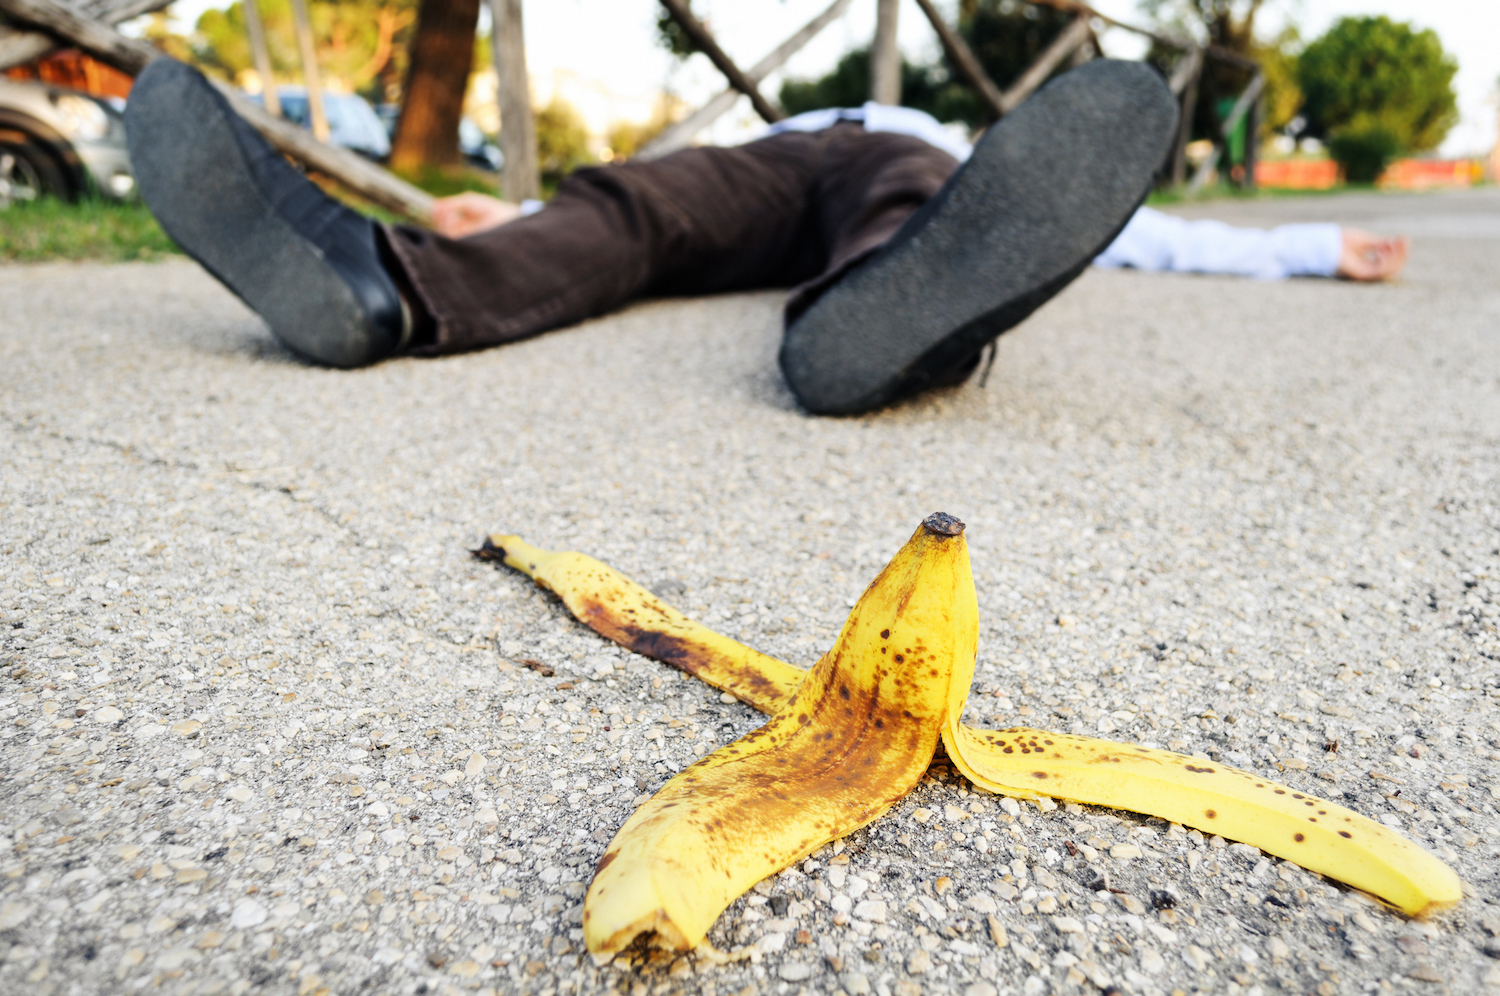 The man fell to the ground on a banana peel.